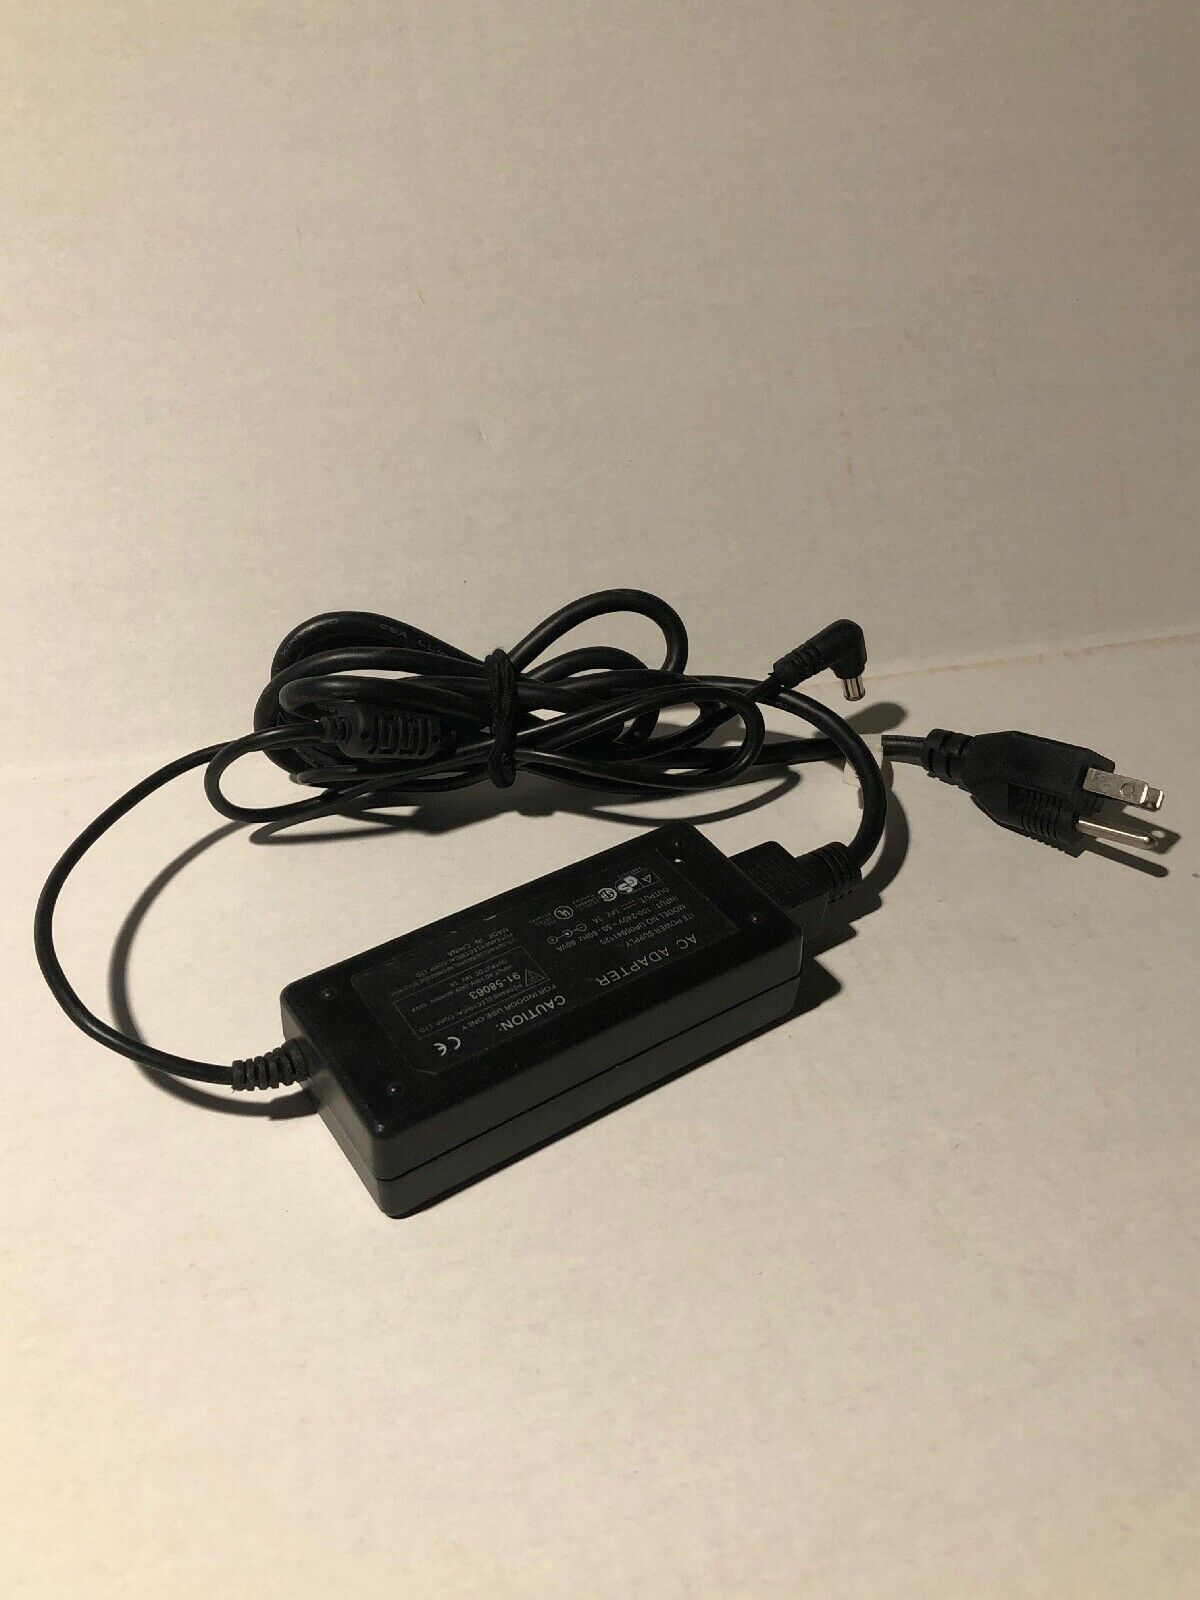 NEW DC14V 3A ITE UP06041120 AC ADAPTER POWER SUPPLY